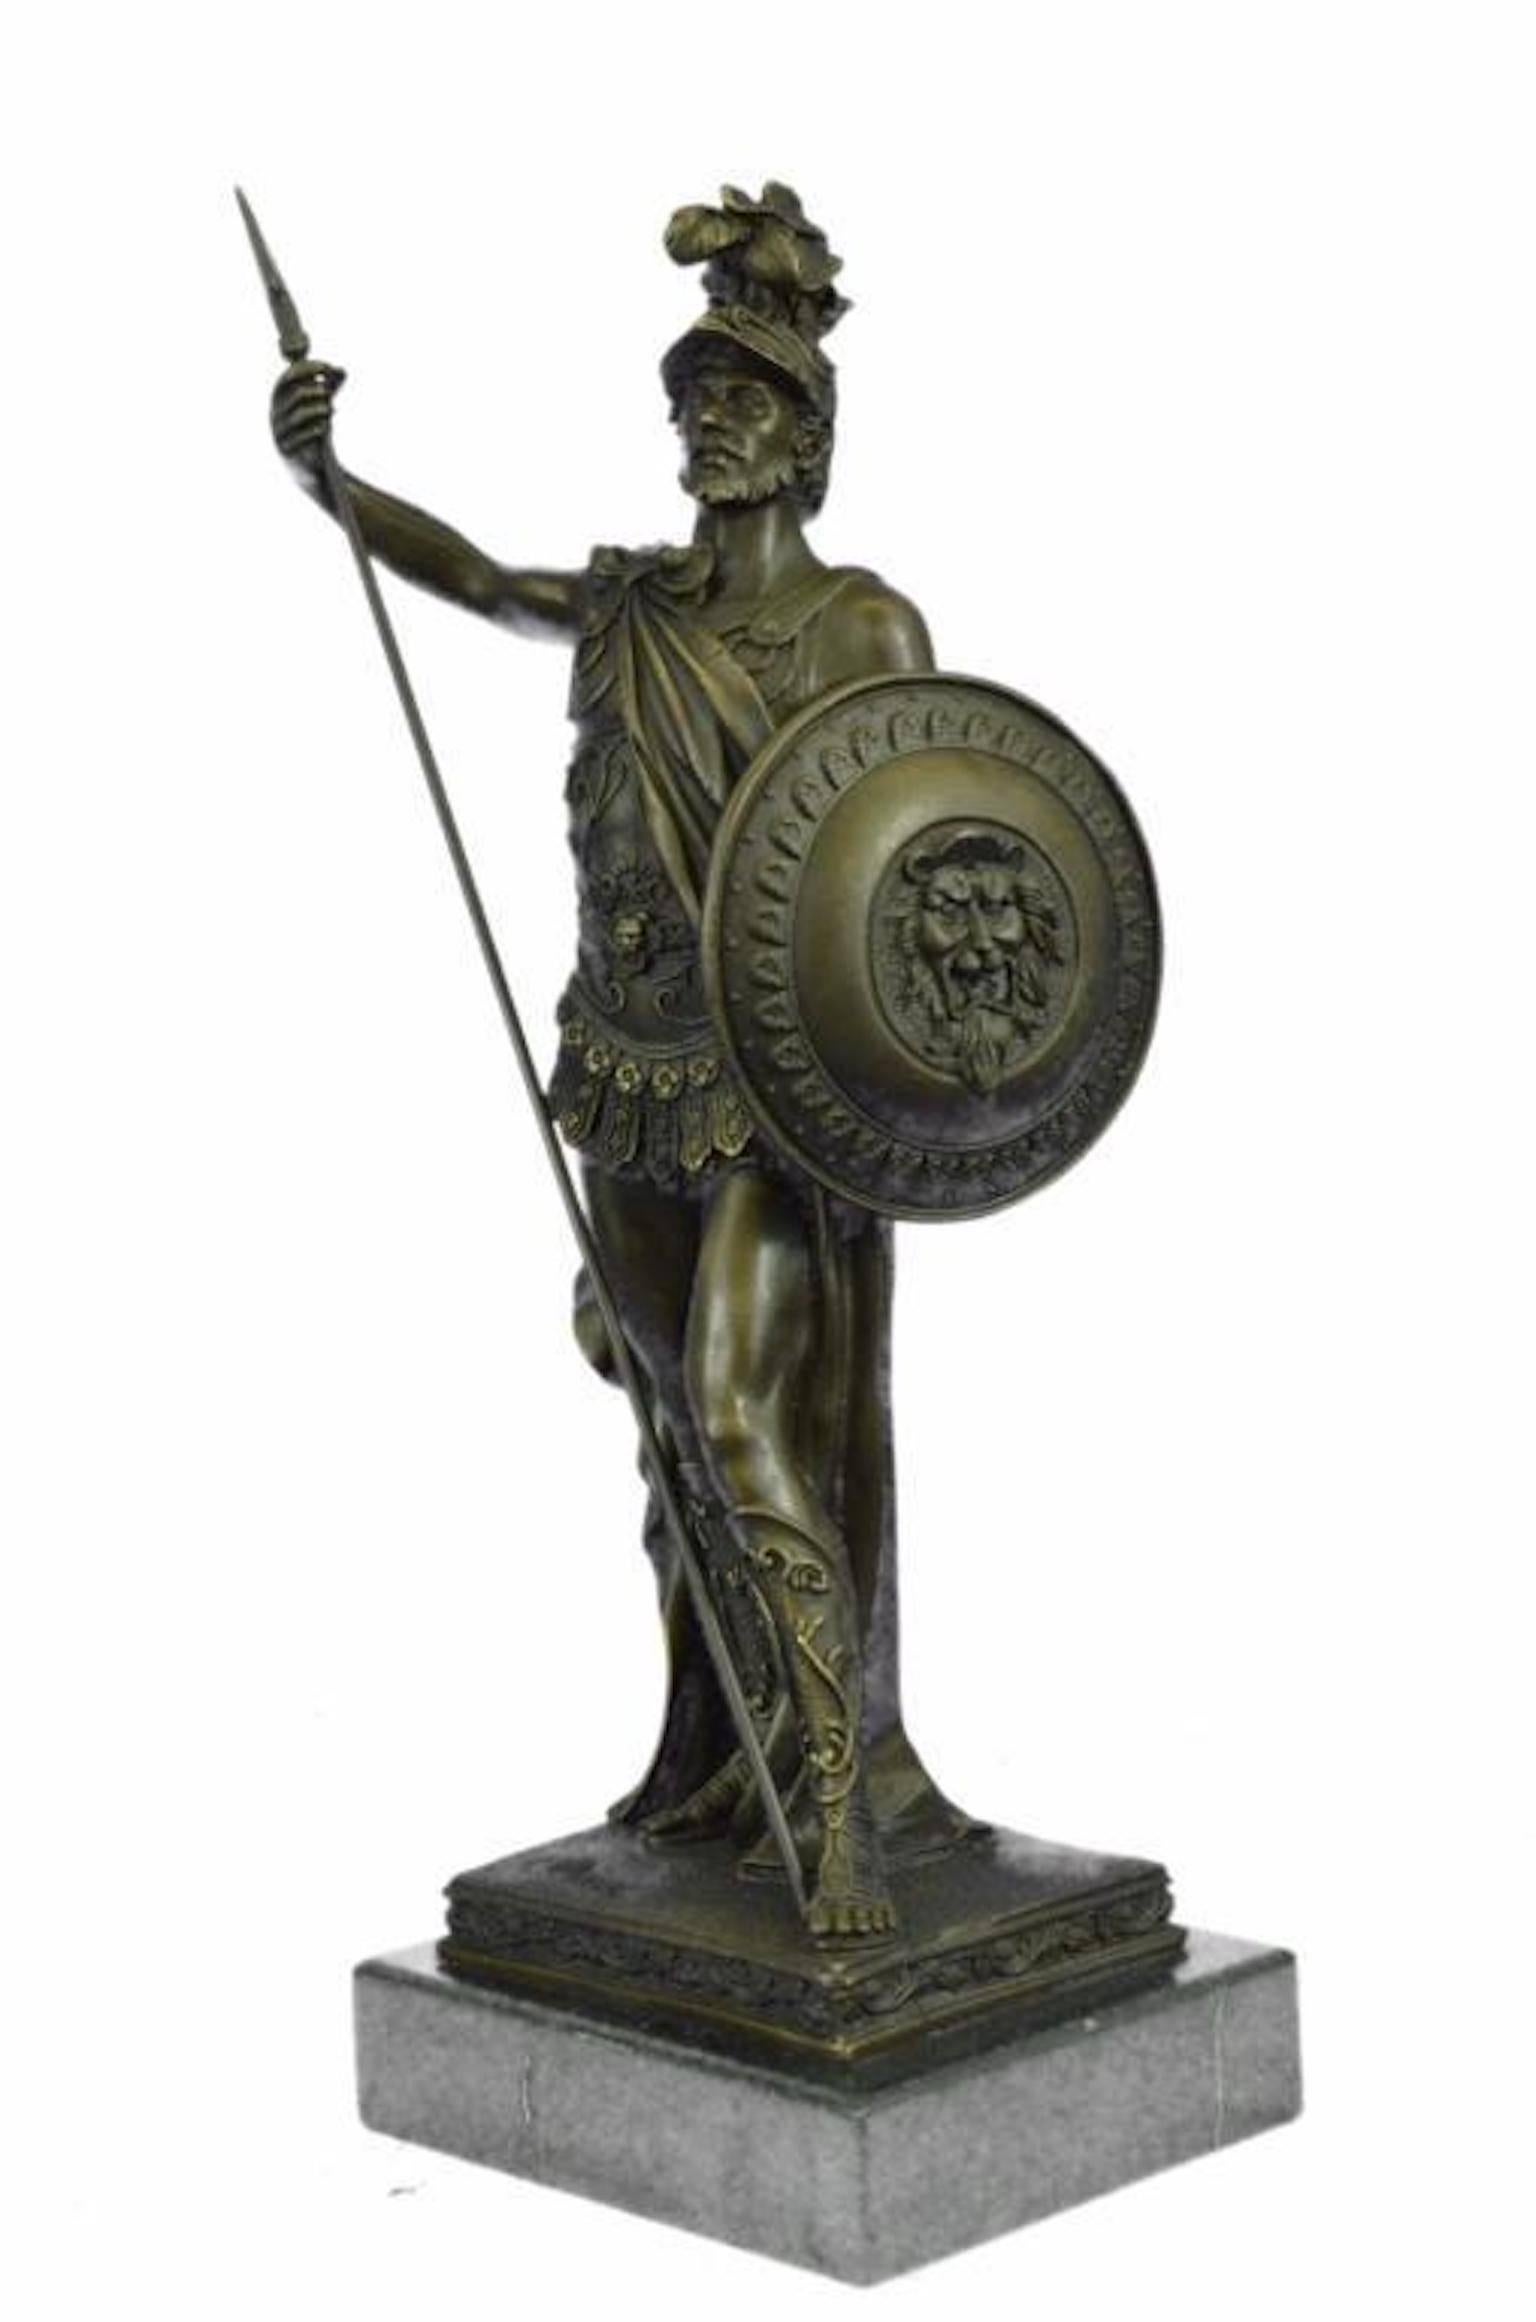 After the model by Edouard Drouot ( French, 1859-1945 ) Roman Legion soldier sculpture statue. Lost wax casting method bronze, with brown patina, mounted on marble base. Measures: 14